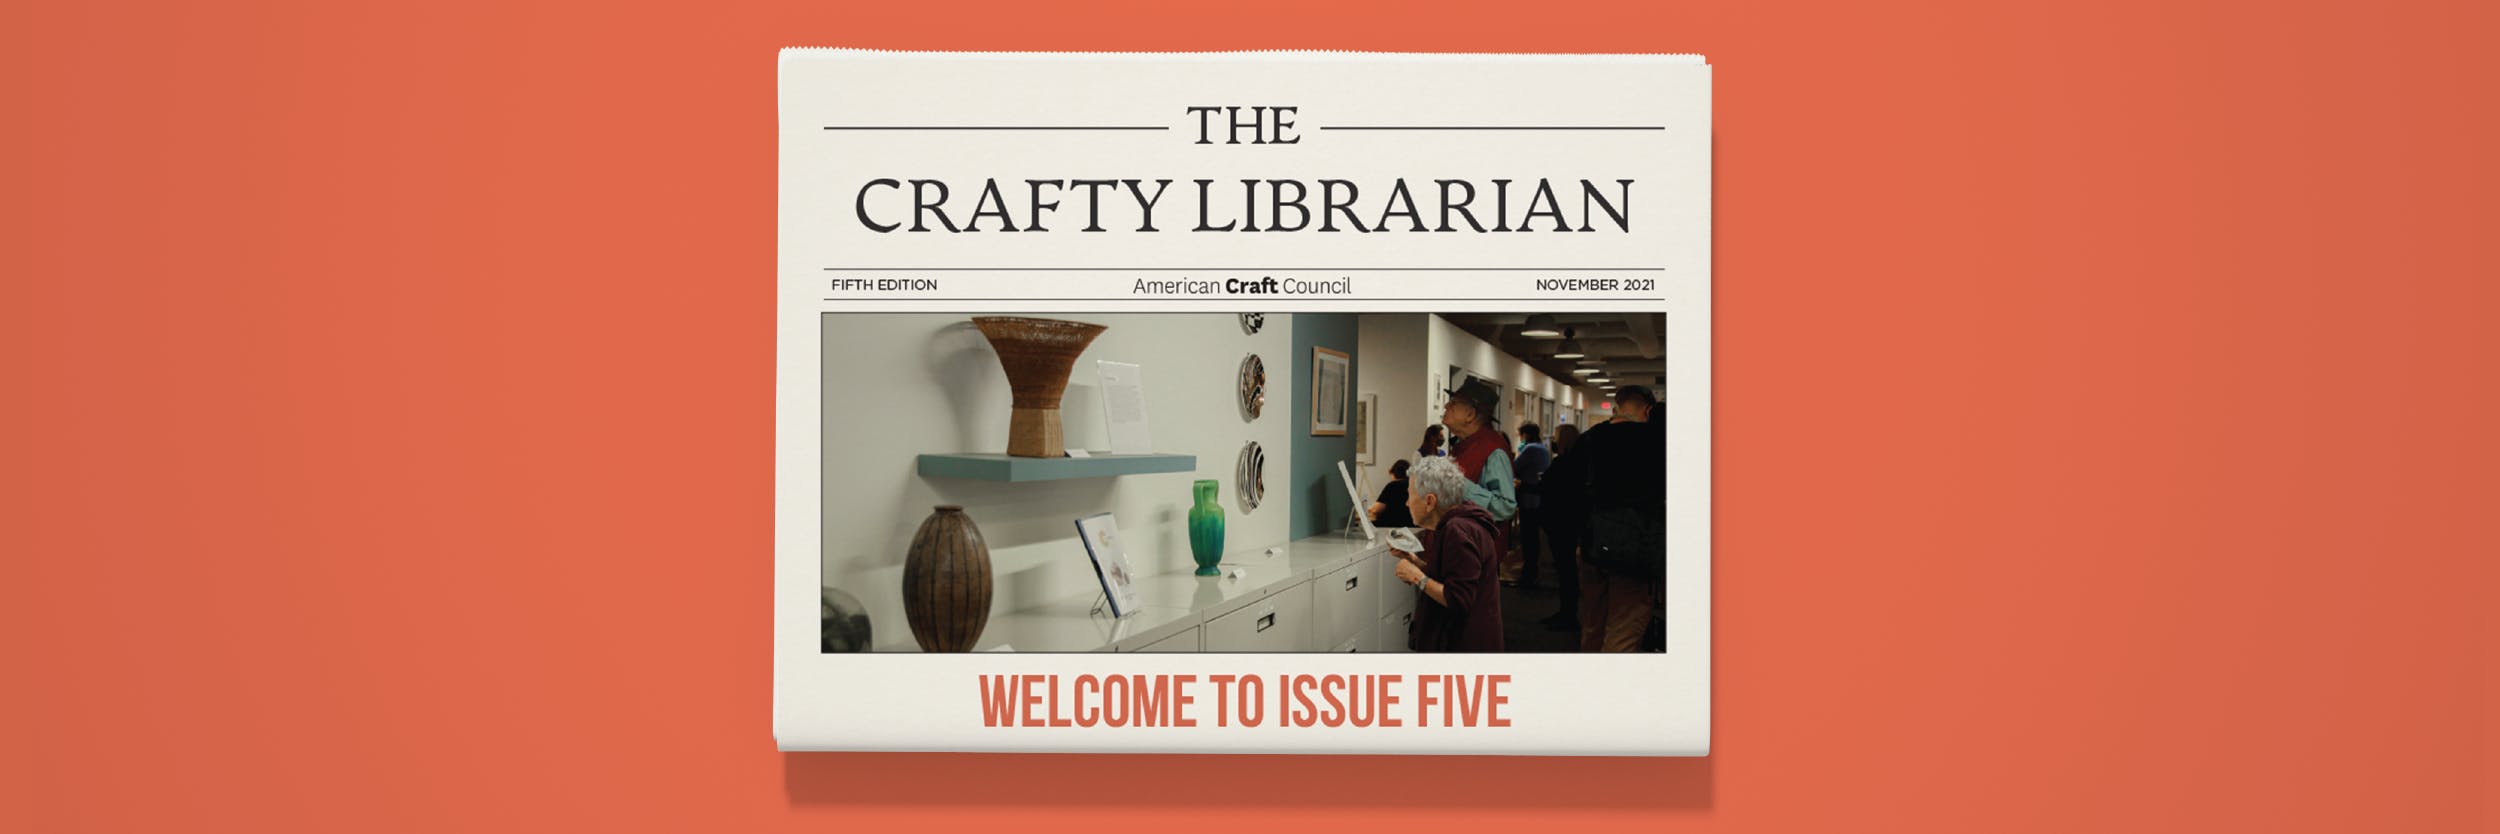 The Crafty Librarian Issue 05 Fall 2021